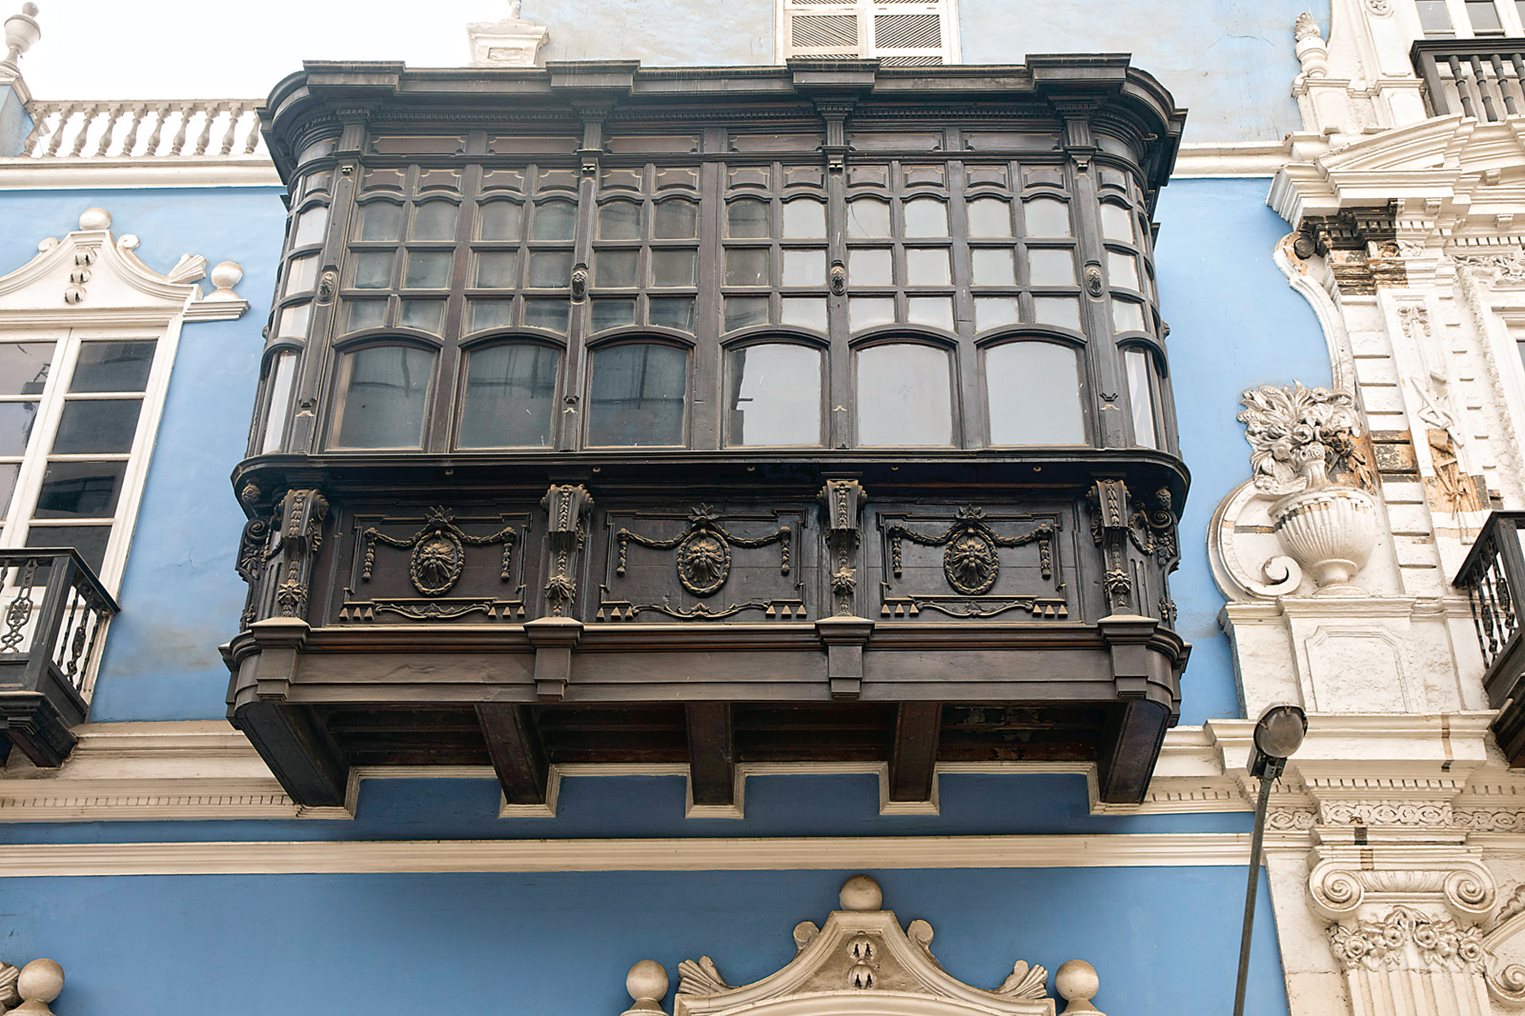 Built at the turn of the 19th century by a Spanish merchant and recently restored, the balconies along the facade of the Casa Osambela reflect an entirely European, neoclassical style. 